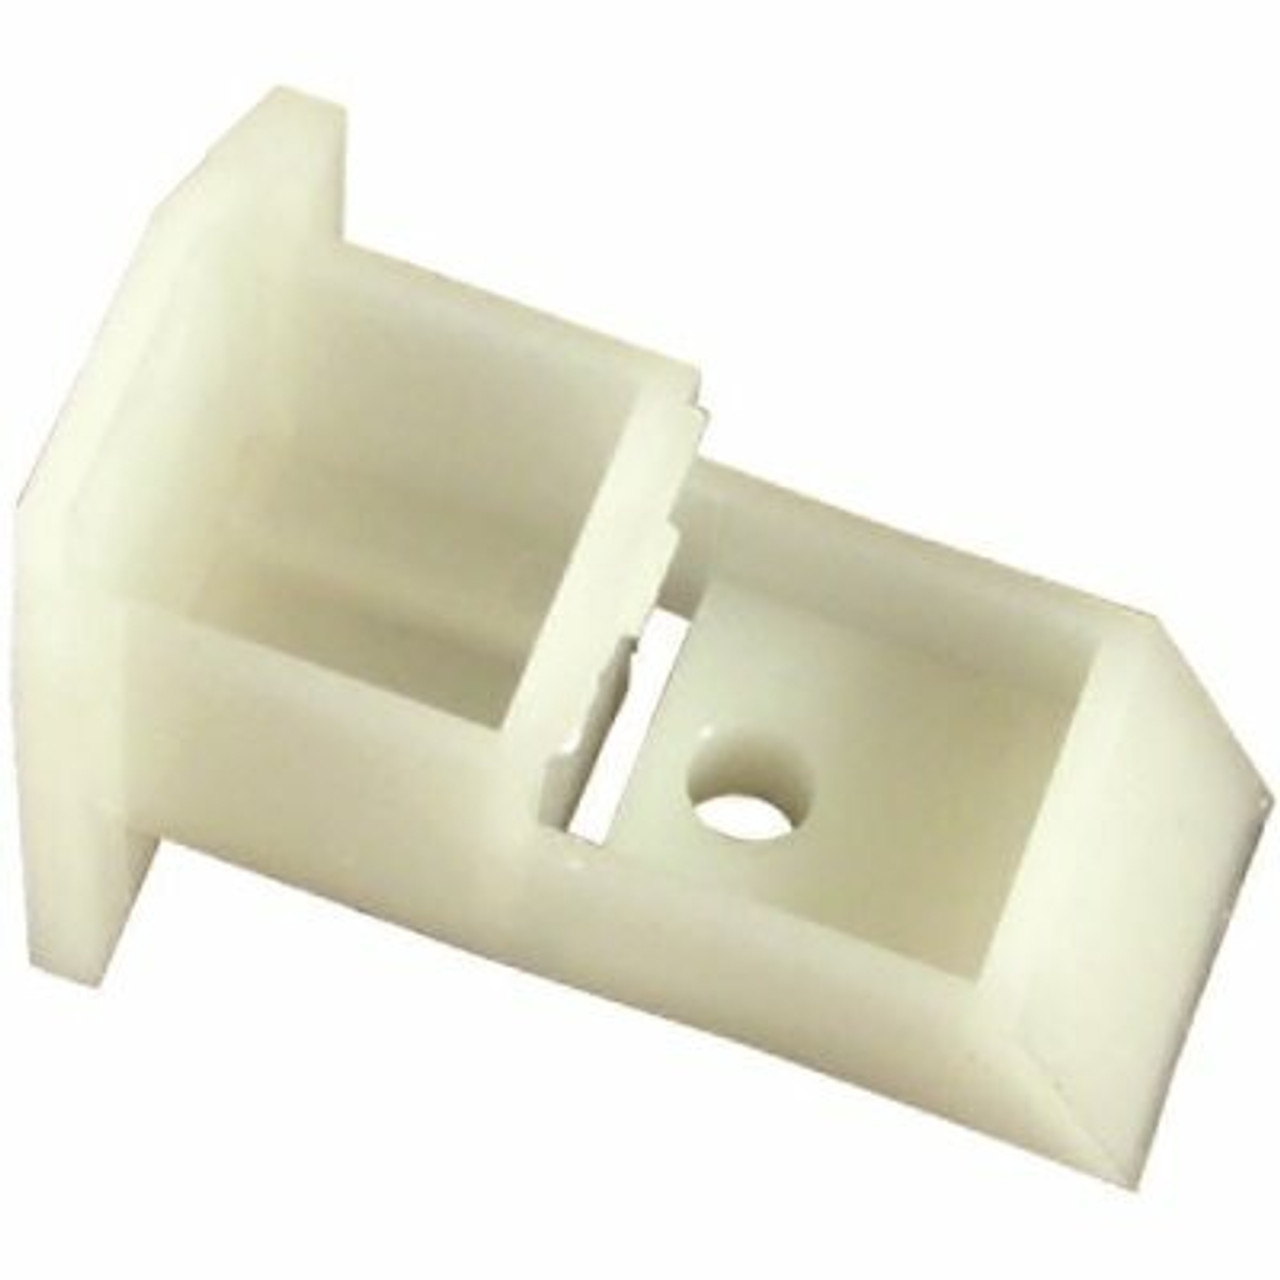 Strybuc Industries Window Channel Balance Top Sash Guide (5-Pack) - 314299806